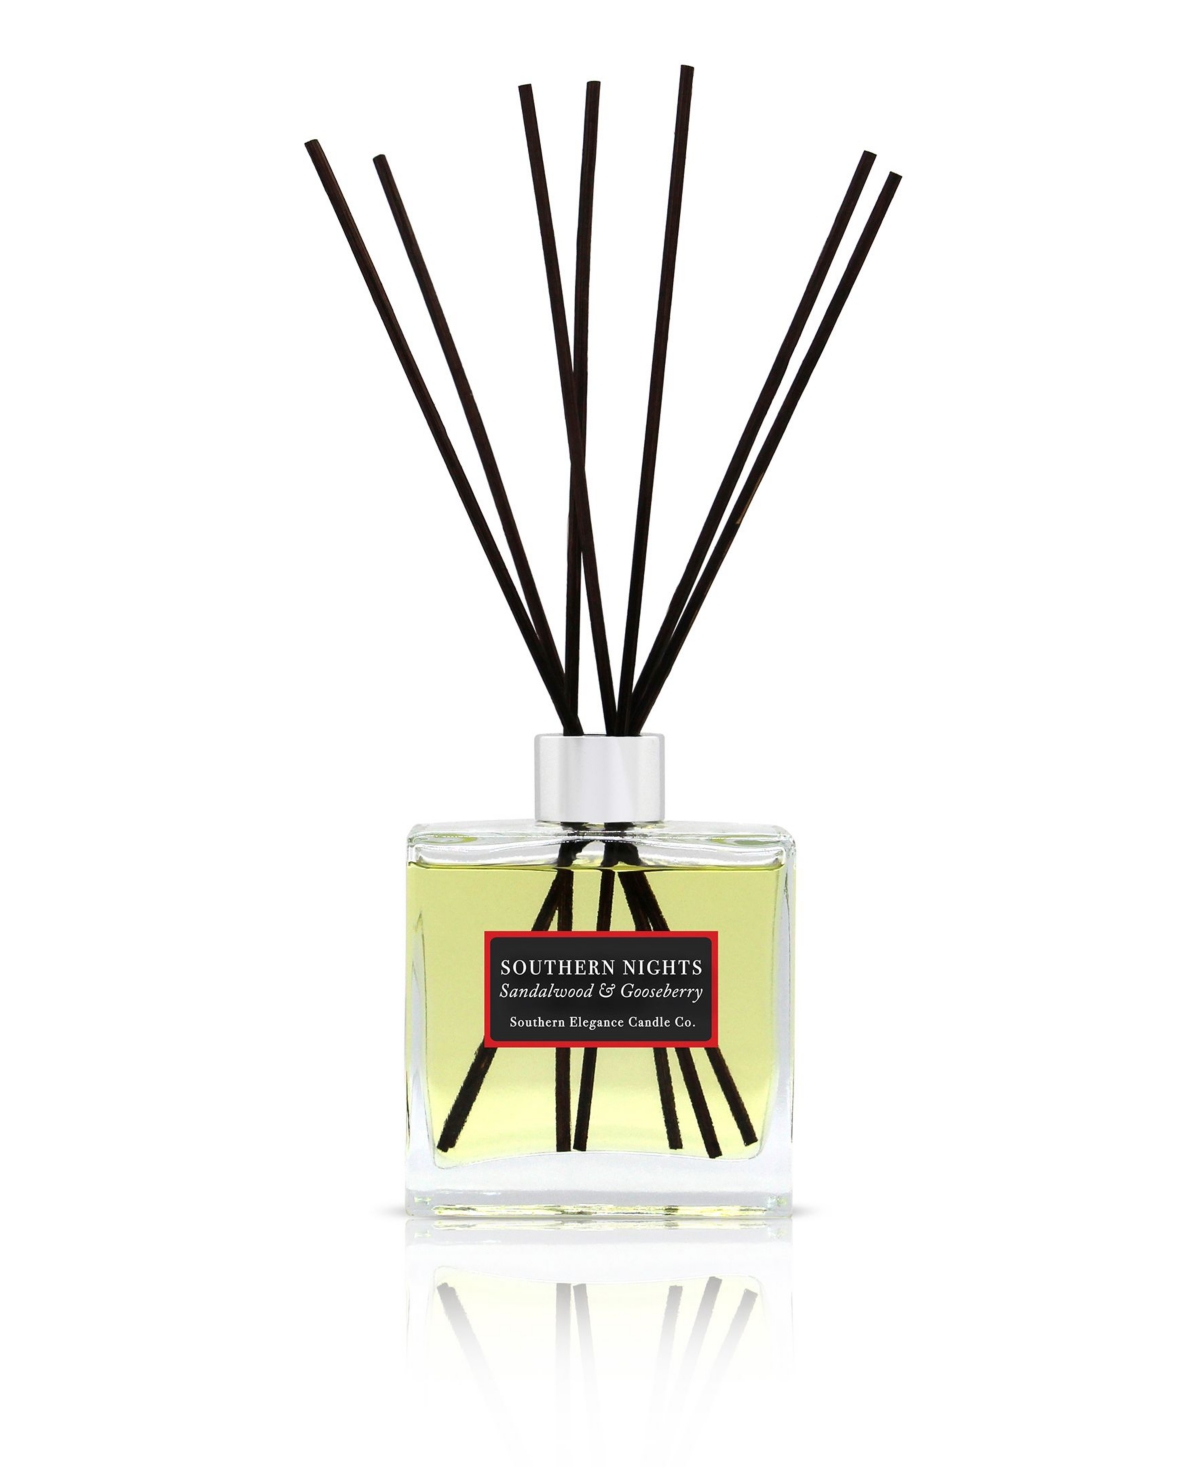 Reeds Southern Nights Diffuser, 6 oz